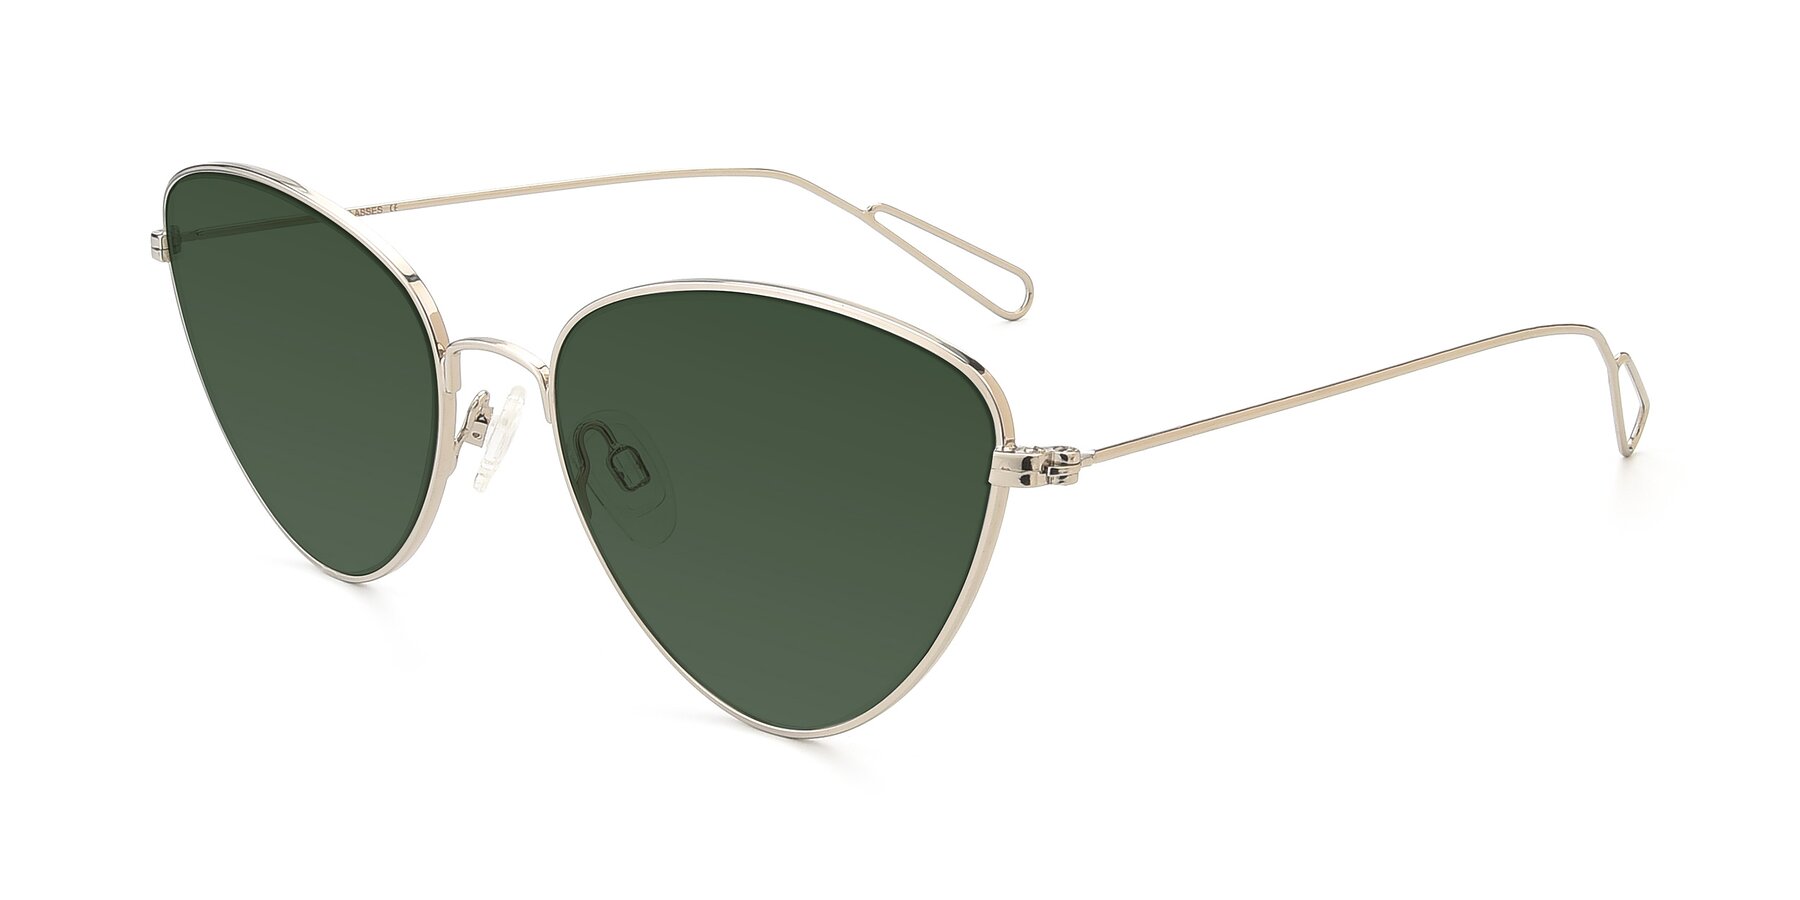 Angle of Butterfly Effect in Silver with Green Tinted Lenses